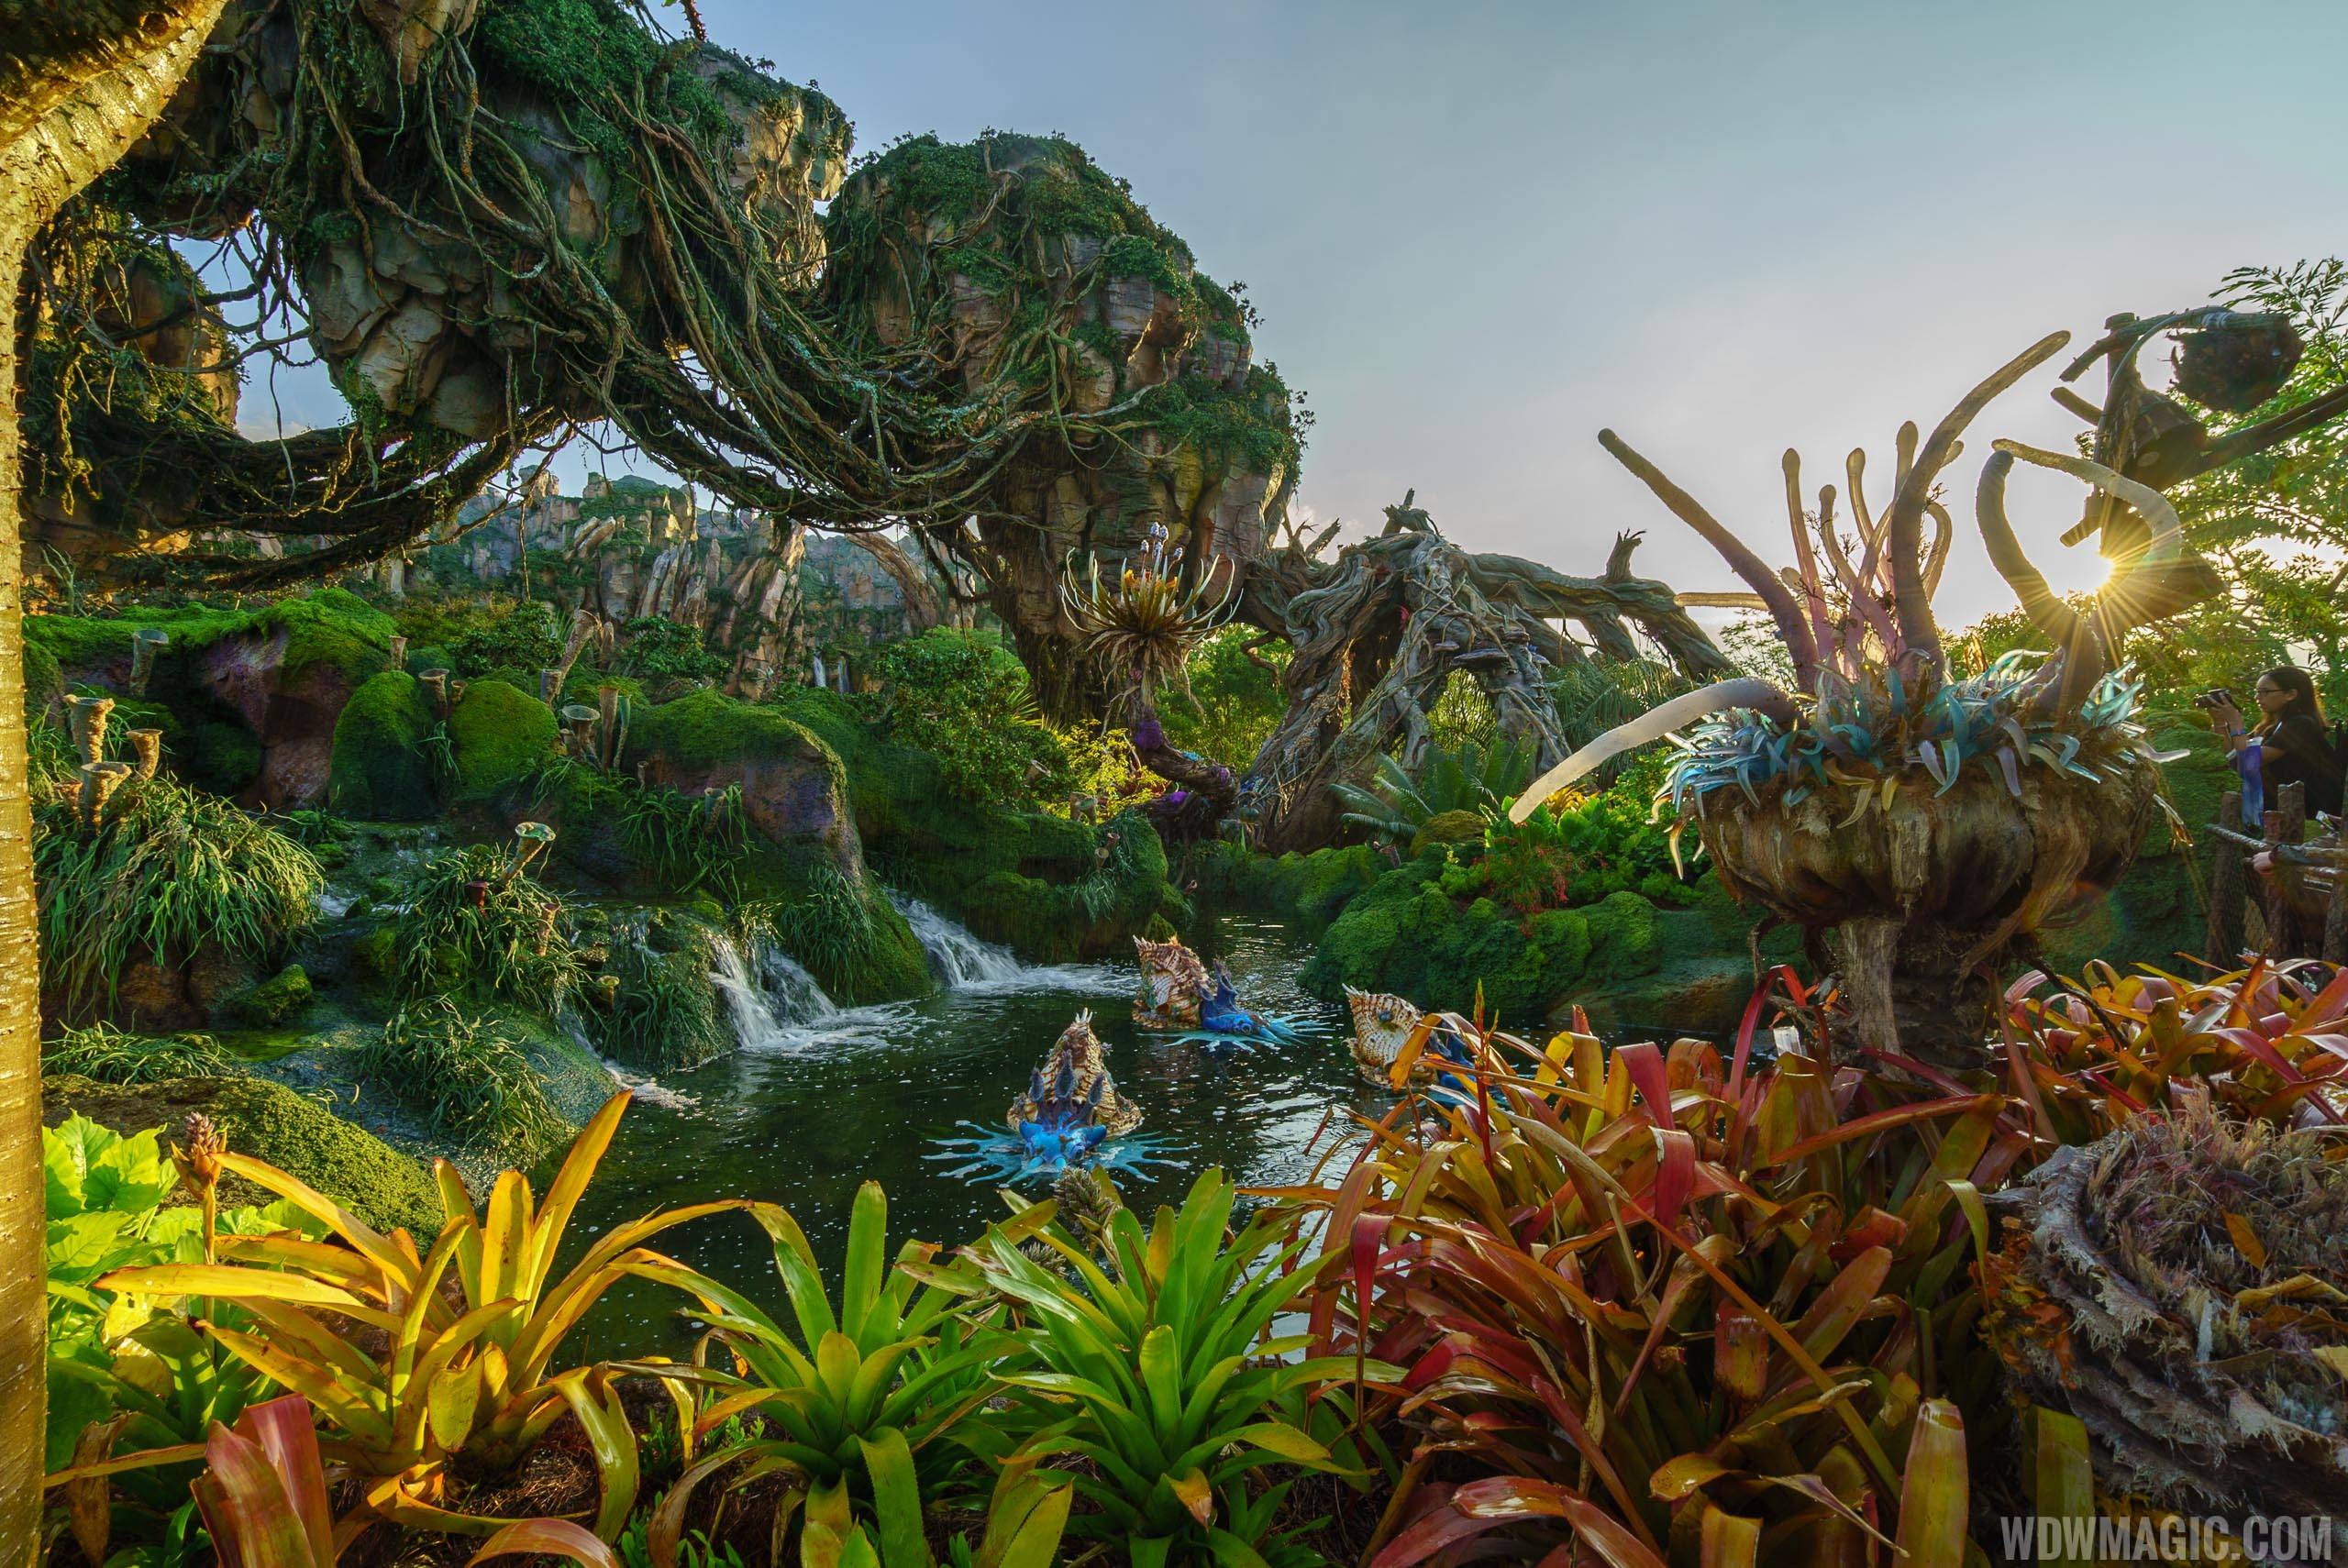 Flight of Passage at Disney's Animal; Kingdom currently leads the wait times at 160 minutes